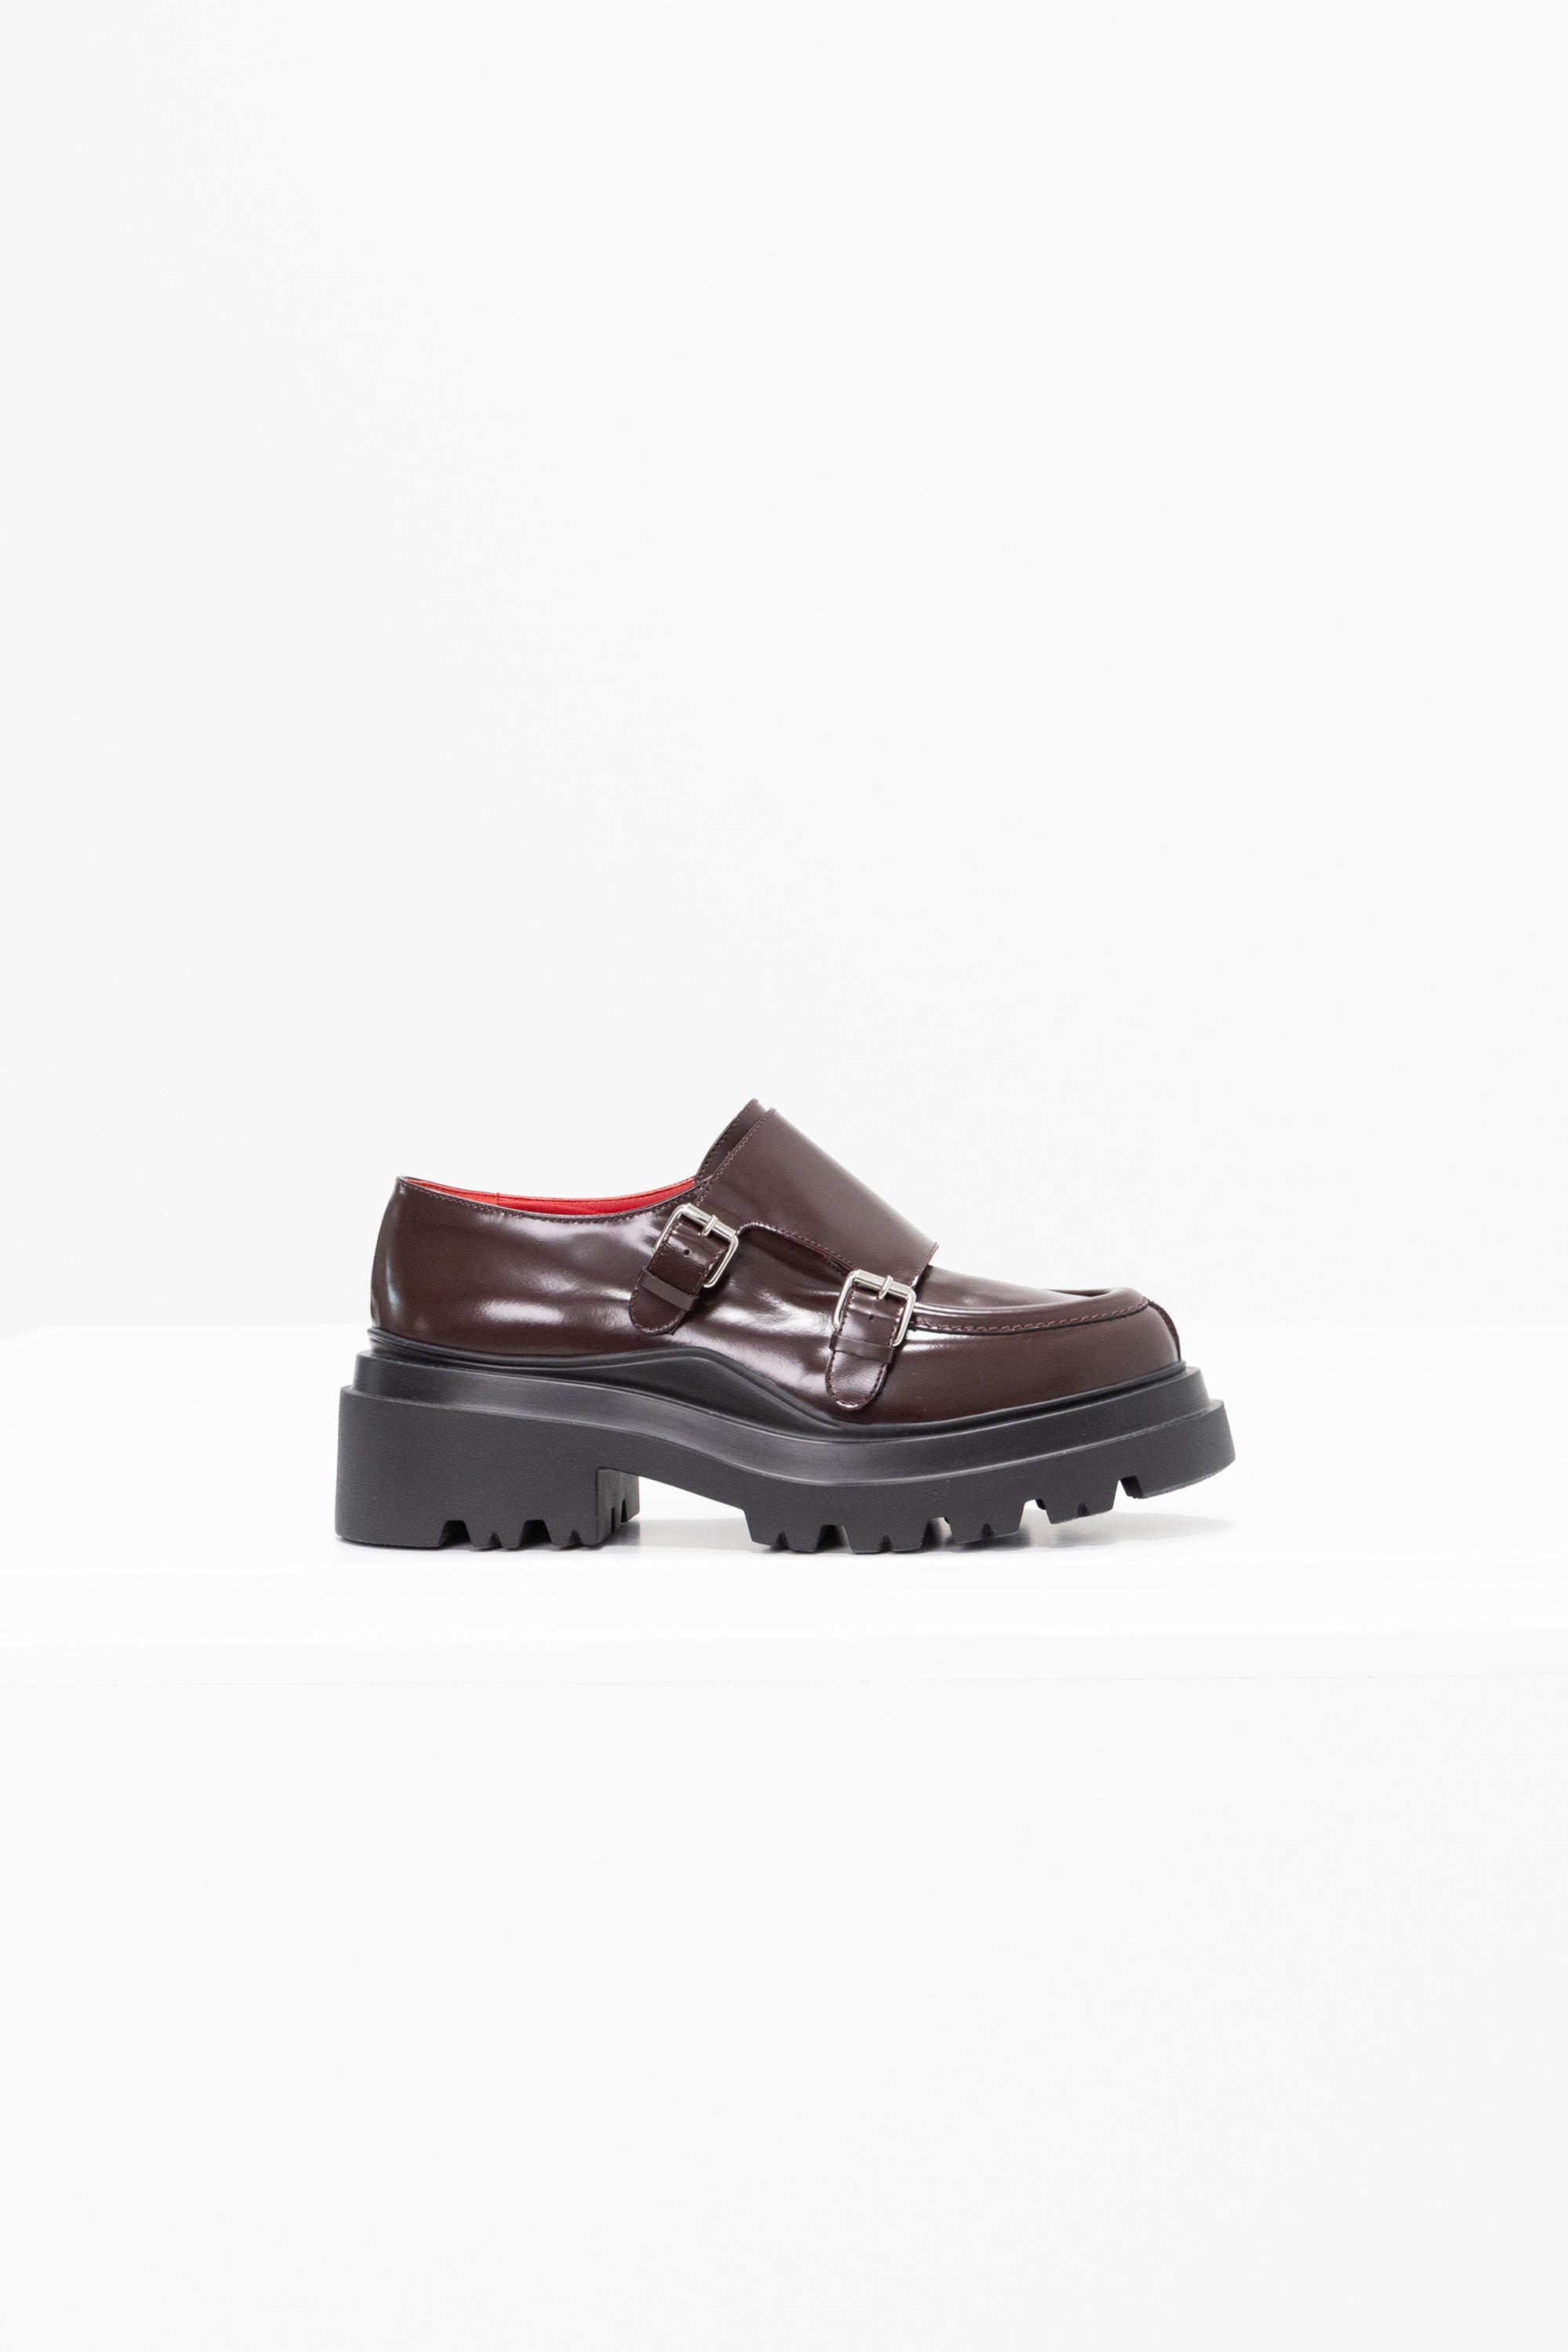 PLAN C - Loafer with Buckles, Oxblood